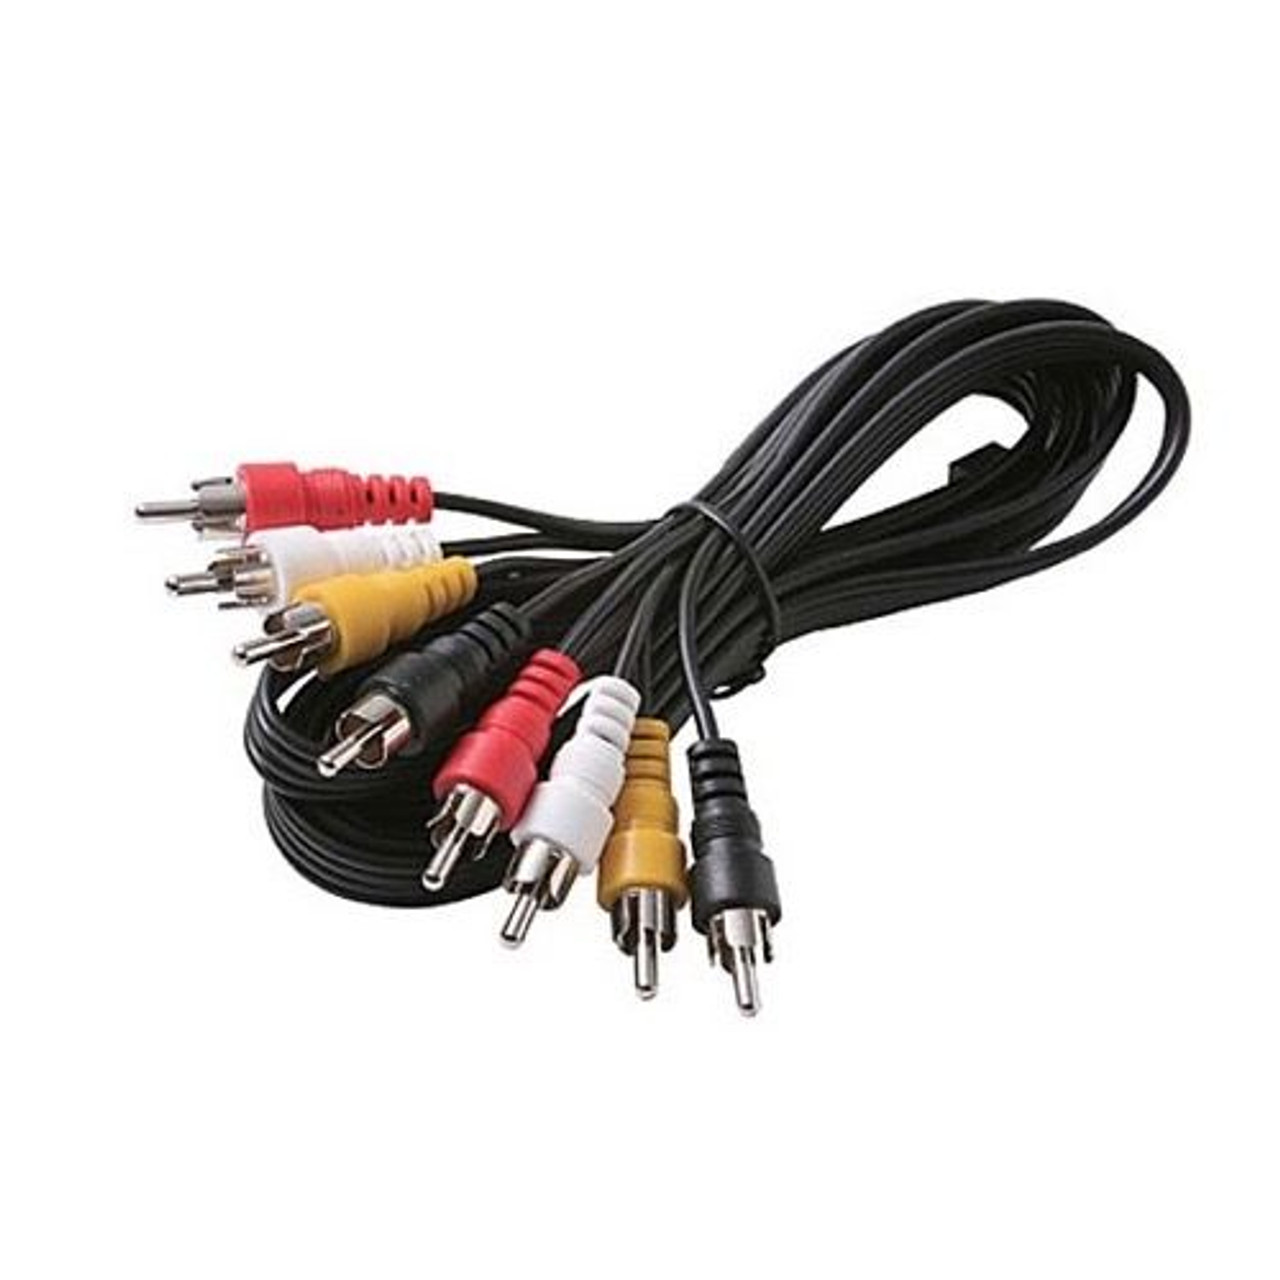 Eagle 6' FT 4-RCA Male Plug Each End Quad Audio Video Cable Stereo R/Y/W/B Audio Video Cable Composite A/V Digital Signal Hook-Up Jumper with RED WHITE YELLOW BLACK Plug Connectors